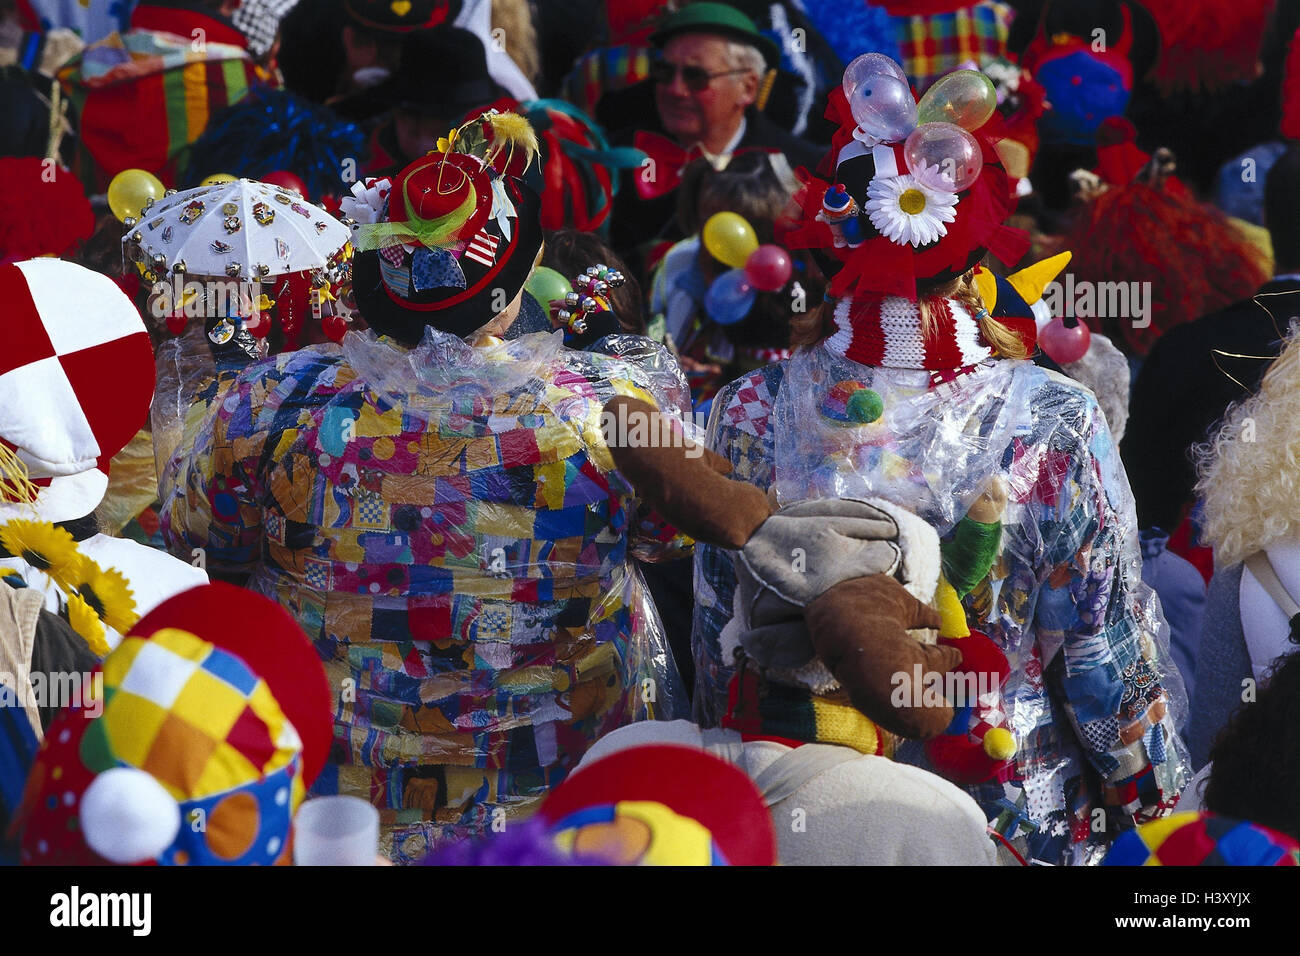 Germany, Cologne, carnival, masked, carnival, masks, celebrate, costumes, dresses up, lining, panelled, greasepaint, made up, men, women, happy, funnily Stock Photo